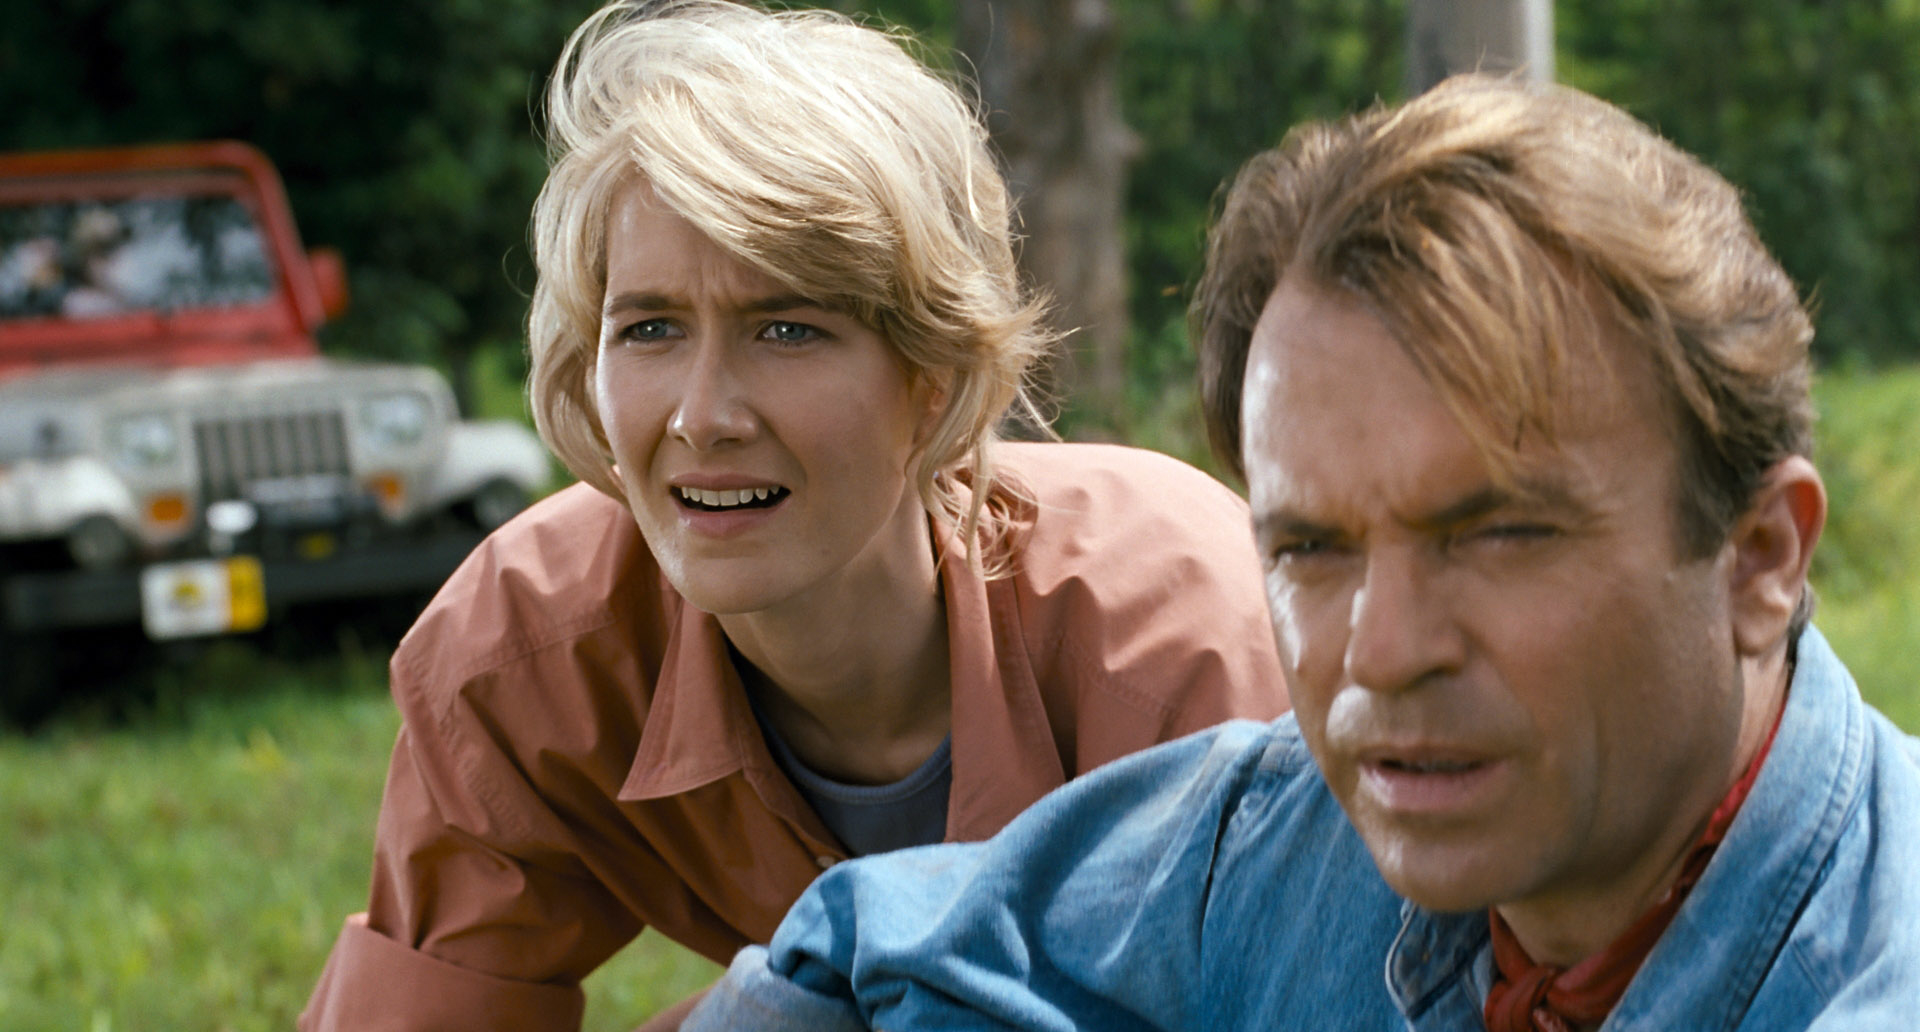 Two characters from Jurassic Park, Ellie Sattler and Alan Grant, show concern as they look off-screen